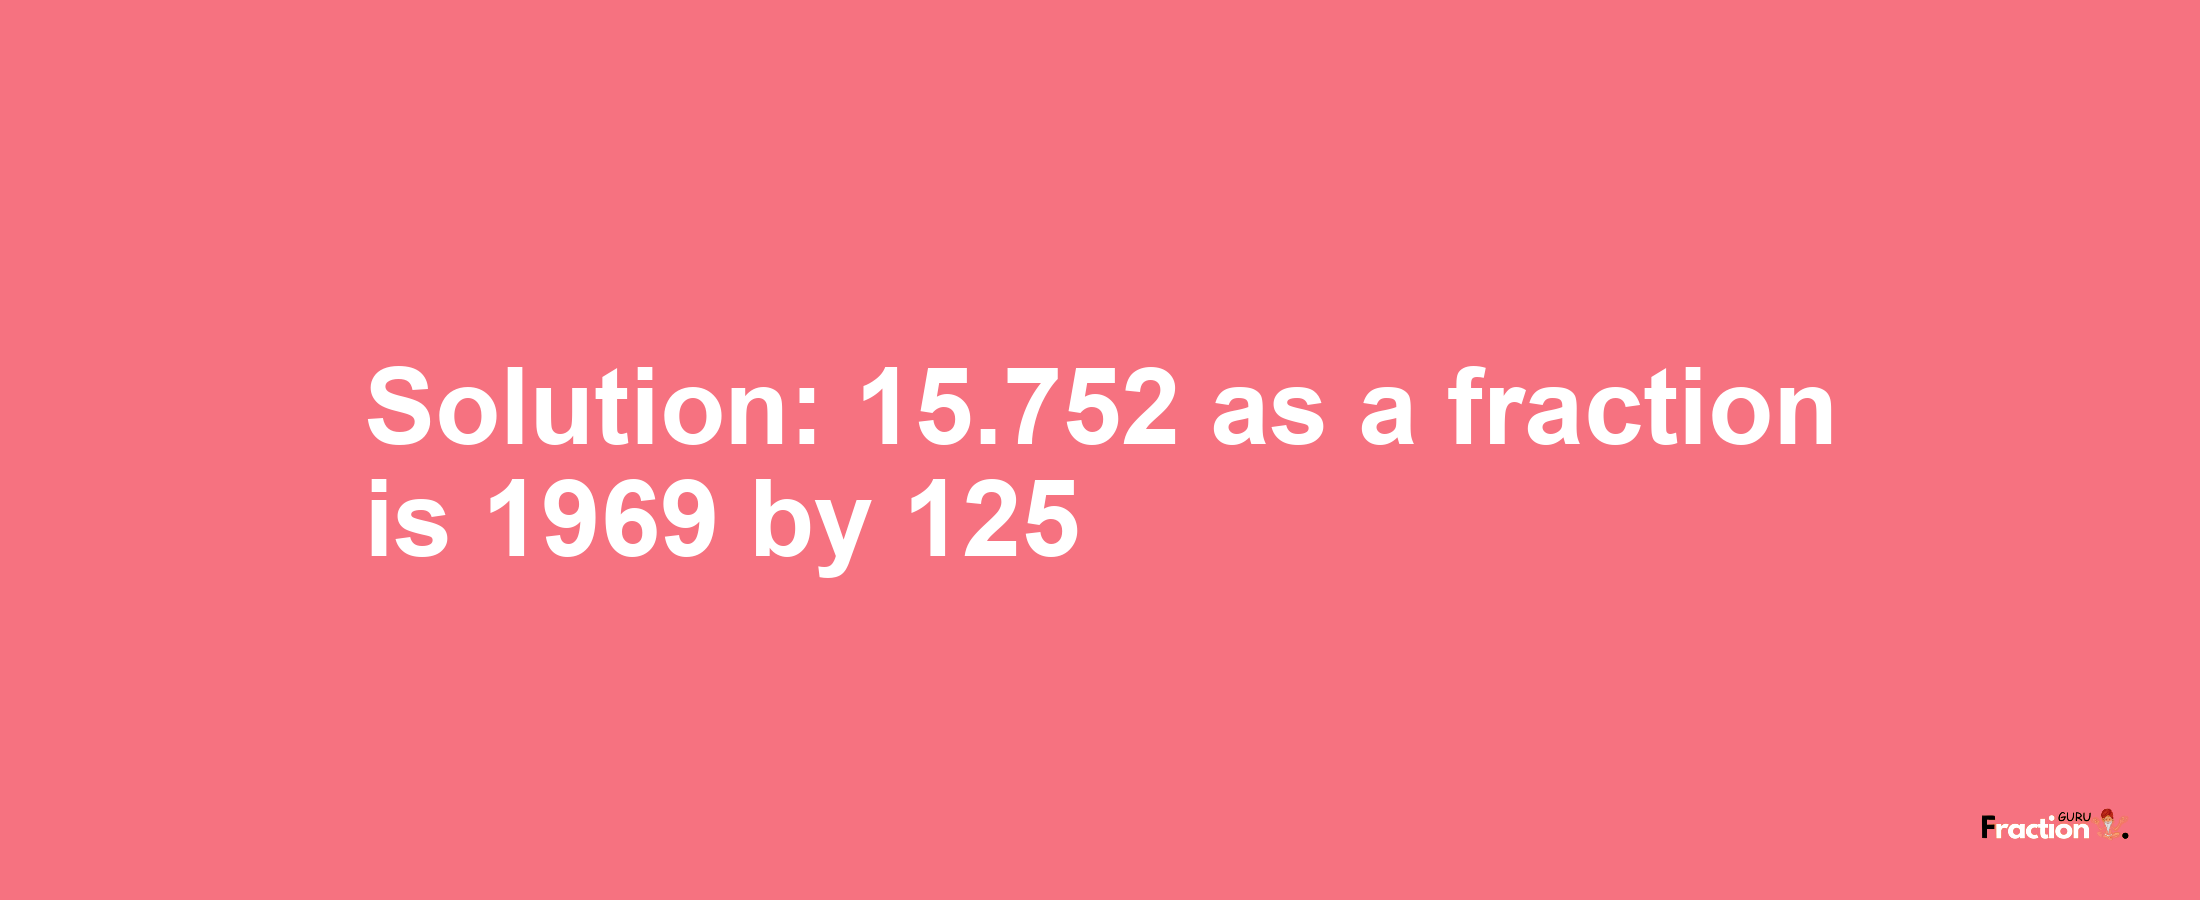 Solution:15.752 as a fraction is 1969/125